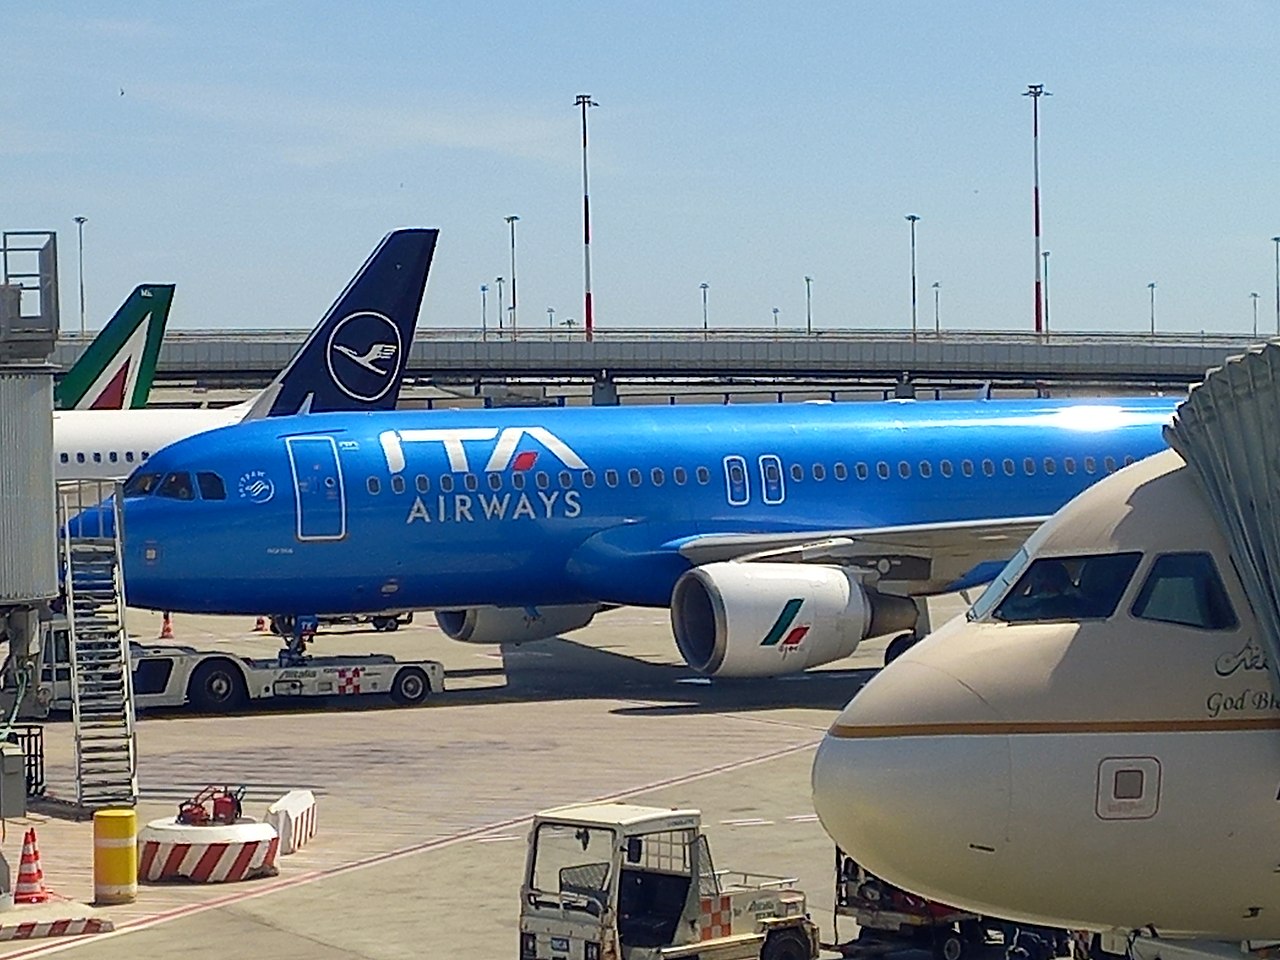 And ITA airways aircraft parked at Rome airport with other airliners surrounding it.